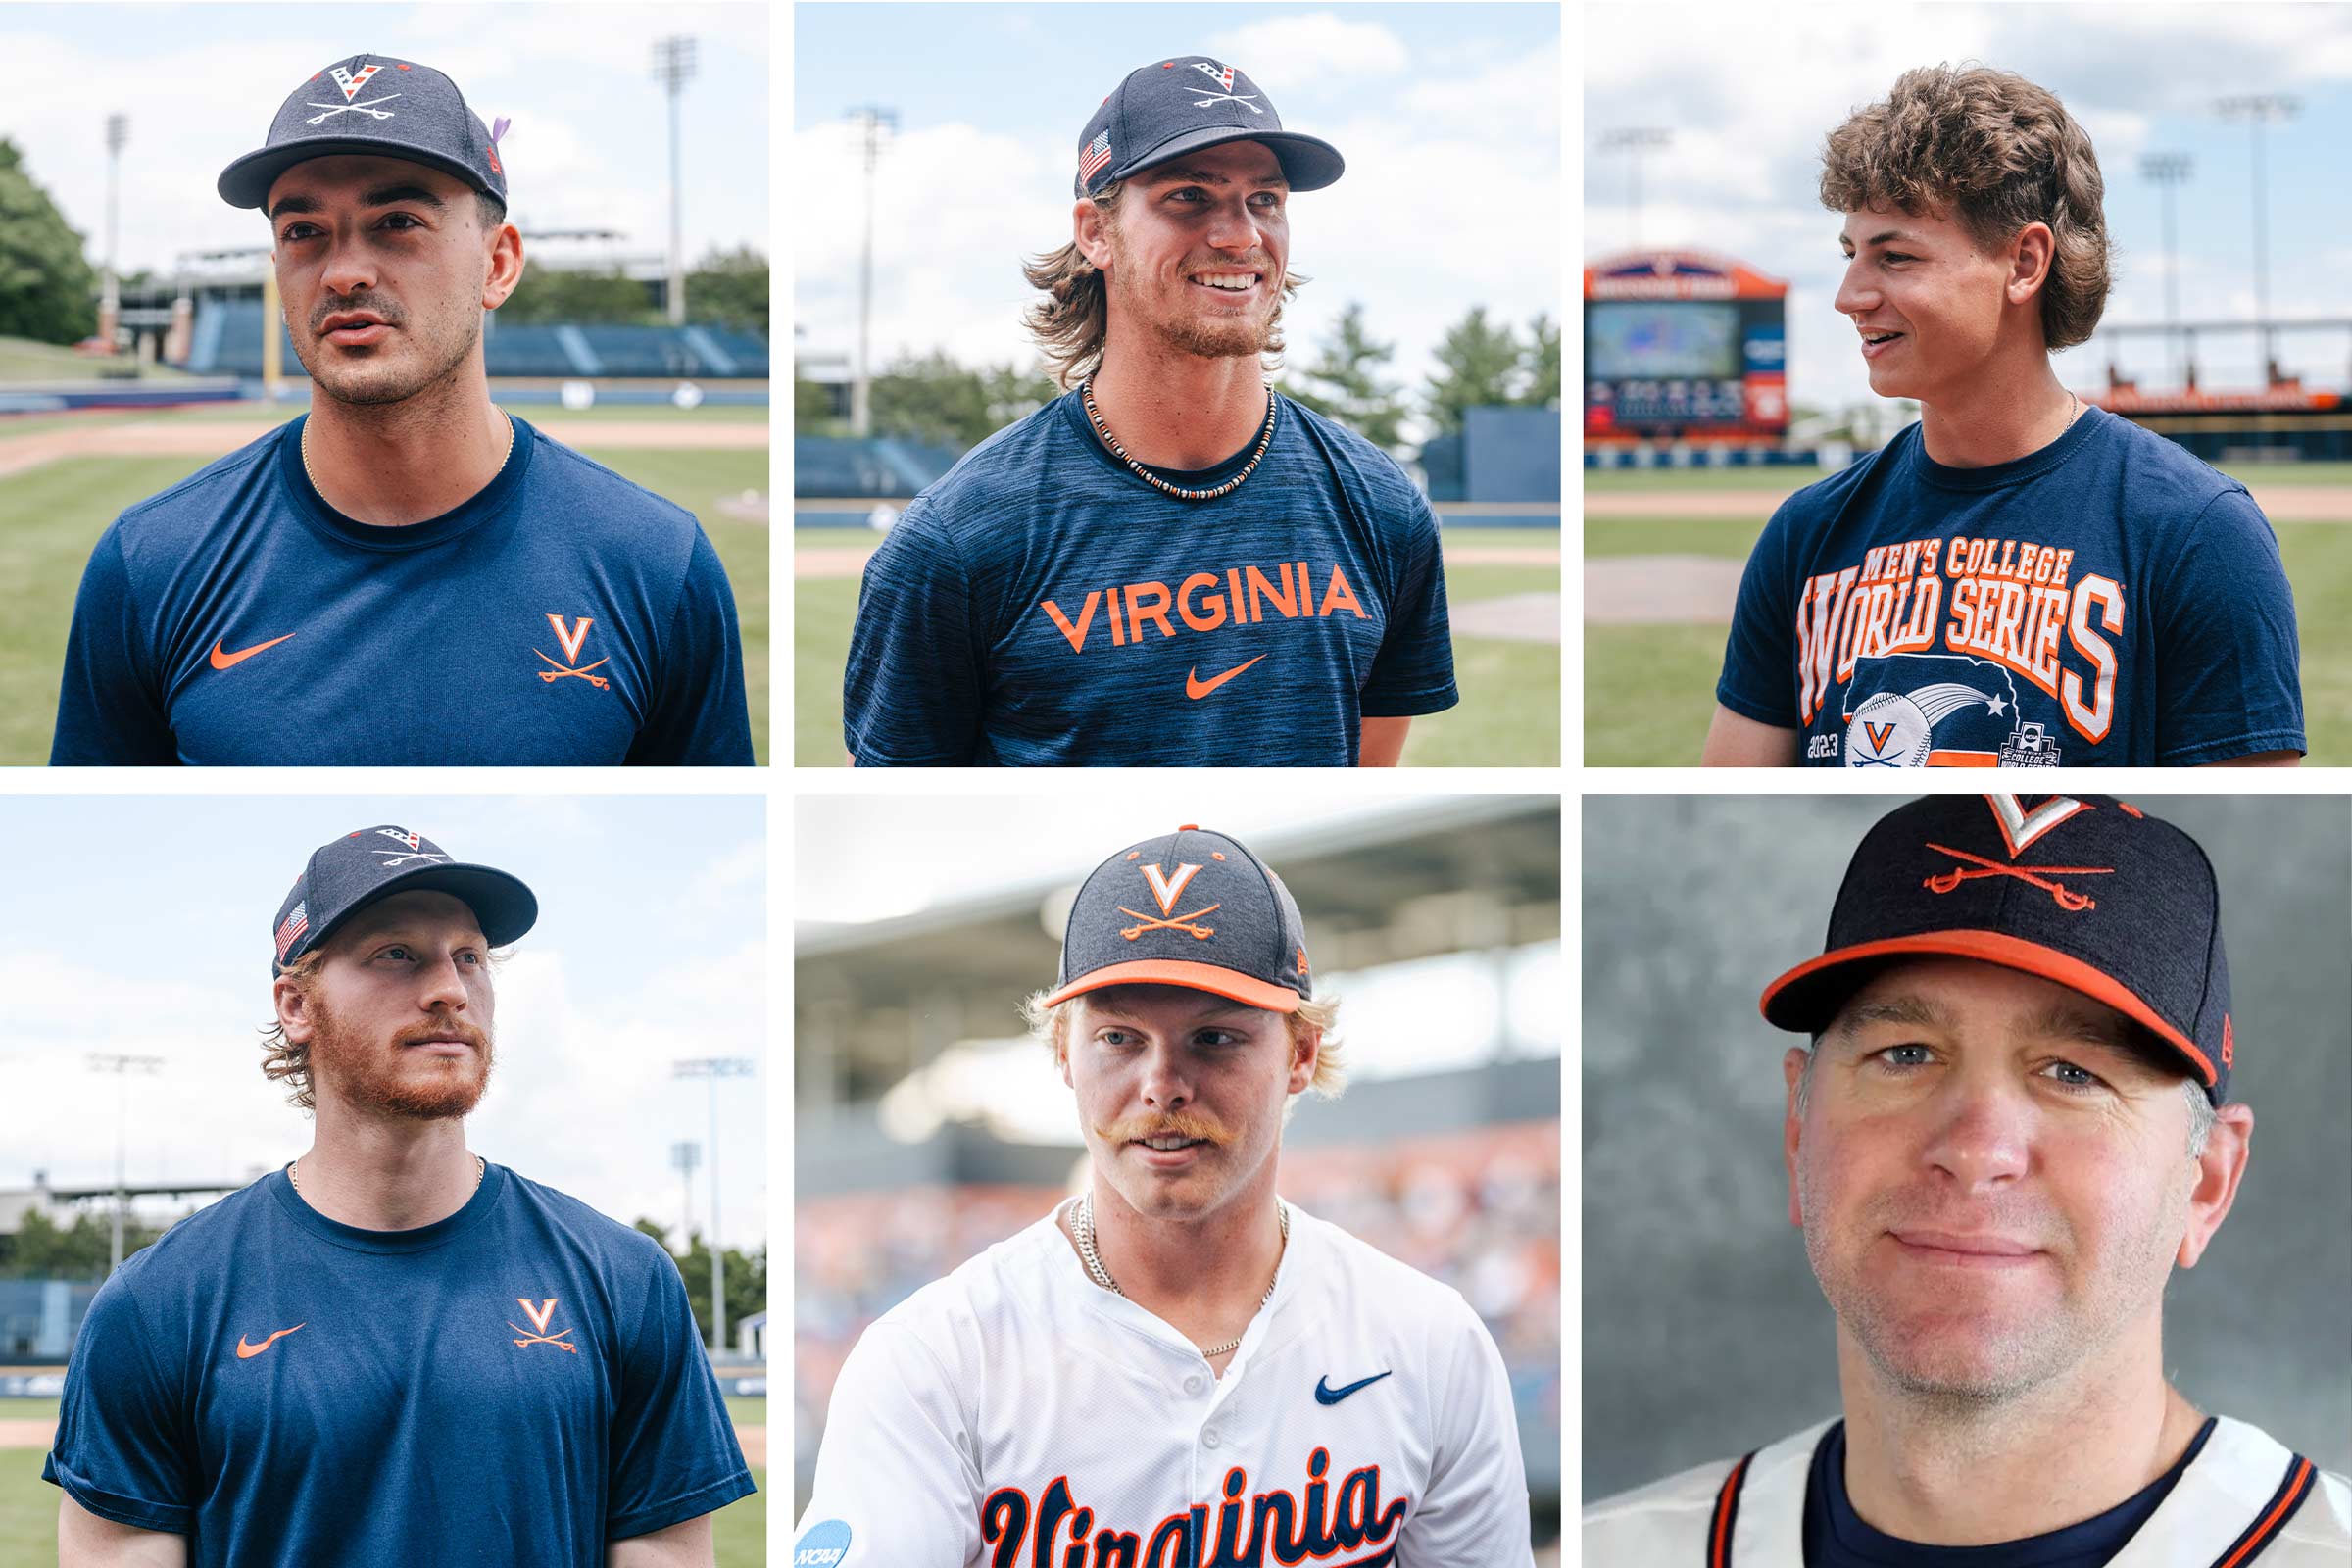 A collection of the superstitious members of UVA’s baseball team. Top row, from left to right, Anthony Stephan, Bobby Whalen and Matt Augustin. Bottom row, from left to right, Casey Saucke, Ethan Anderson and Drew Dickinson.